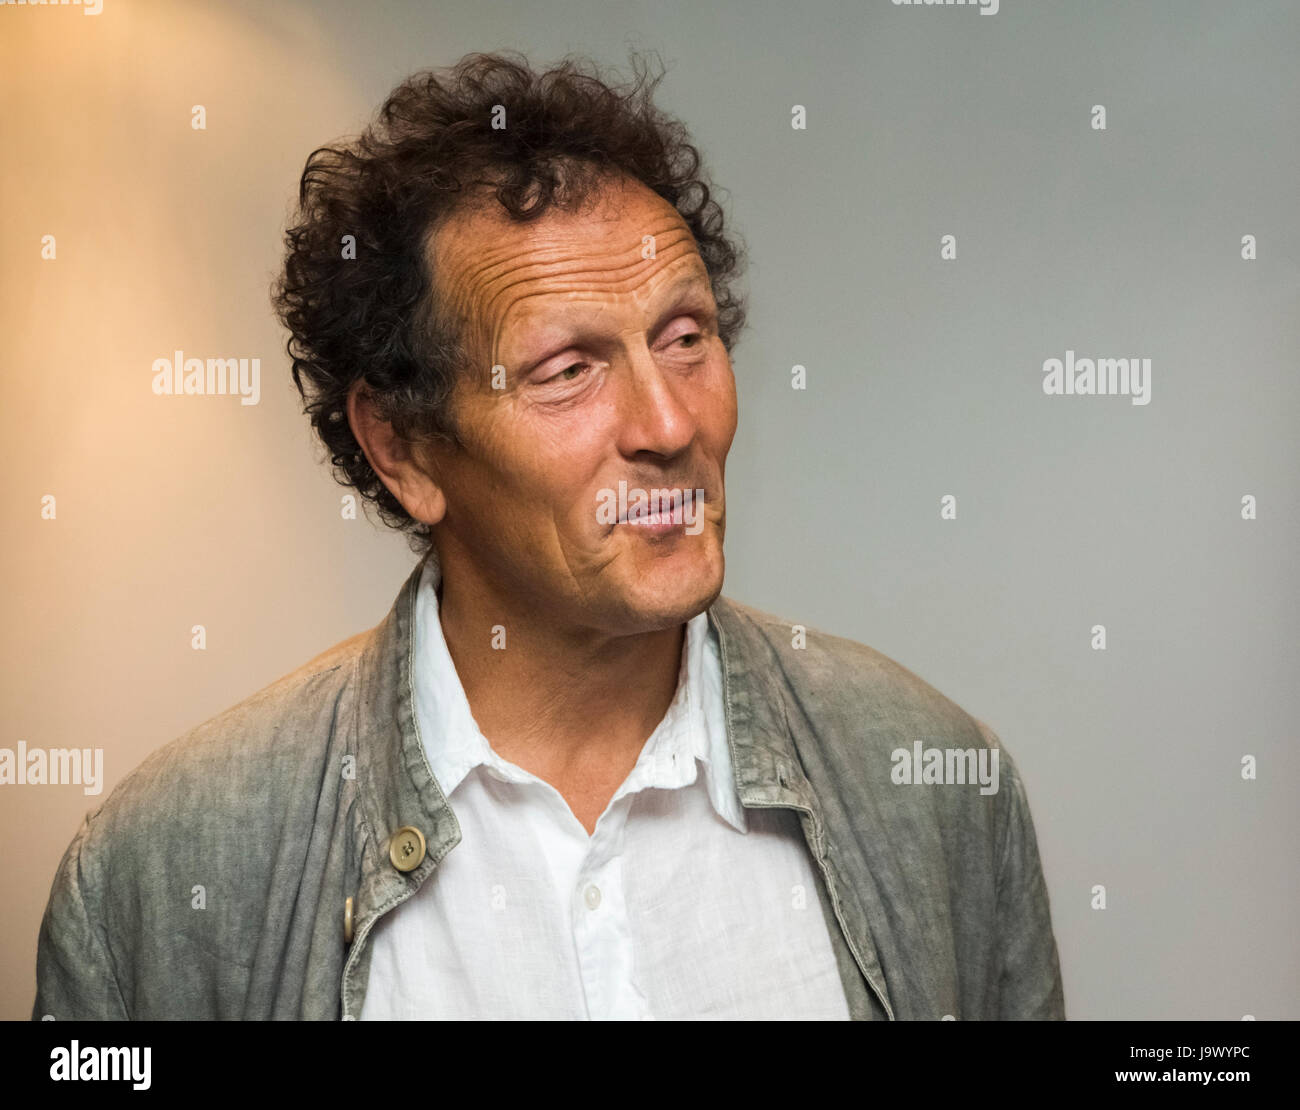 Author, popular television personality, presenter and host of Gardeners World and other TV programmes, Monty Don, aged 61 Stock Photo